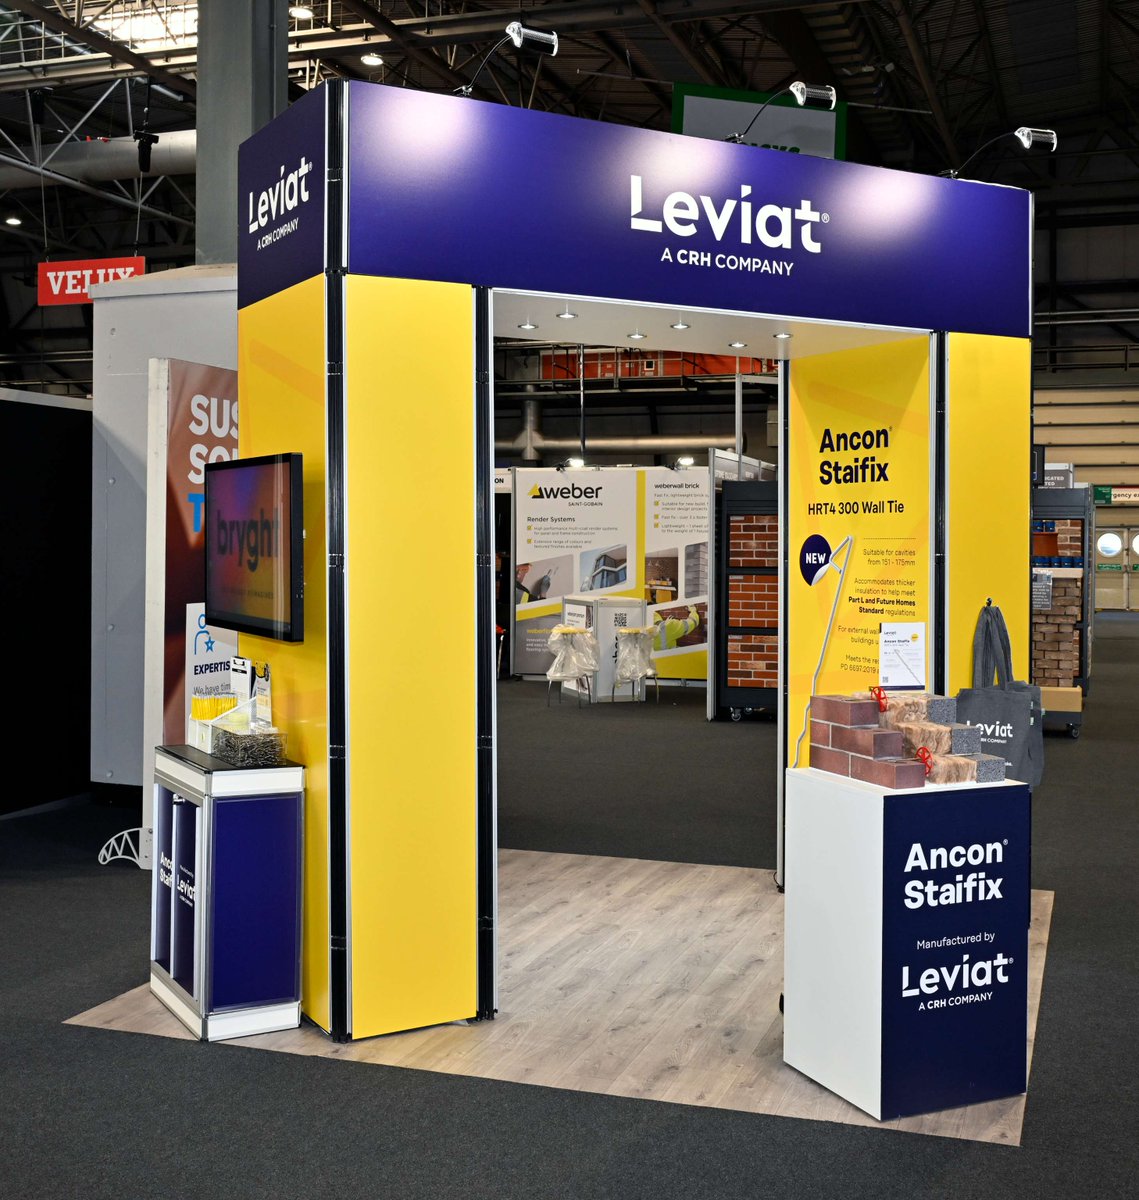 A bright and compact stand built at Jewson Live last month. Constructed using our heavyweight modular system, which is ideal for reconfiguring layouts at different events. 
#exhibitionstands #modularstands #sustainablestands #standbuilders #exhibitiondesign #graphicdesign